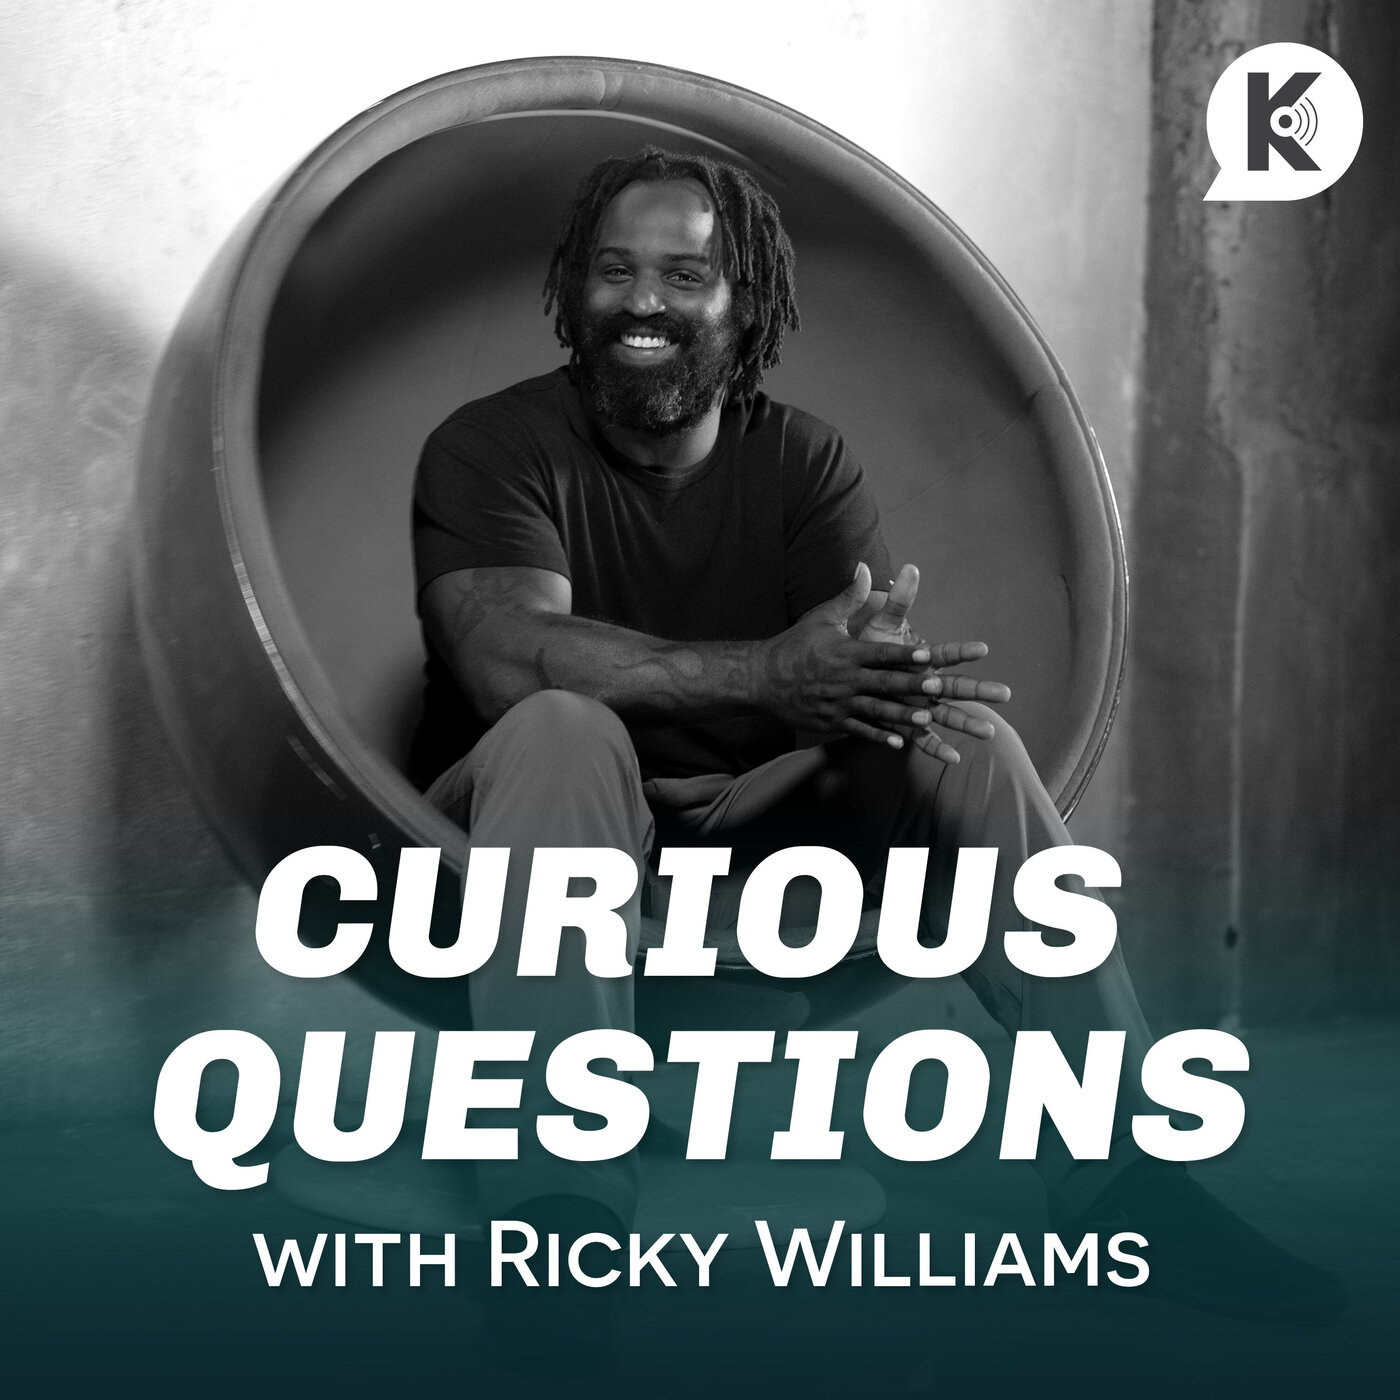 E9 Curious Questions with Ricky Williams | Ep. 9 | Seeking Justice in Unjust Times with Corvain Cooper